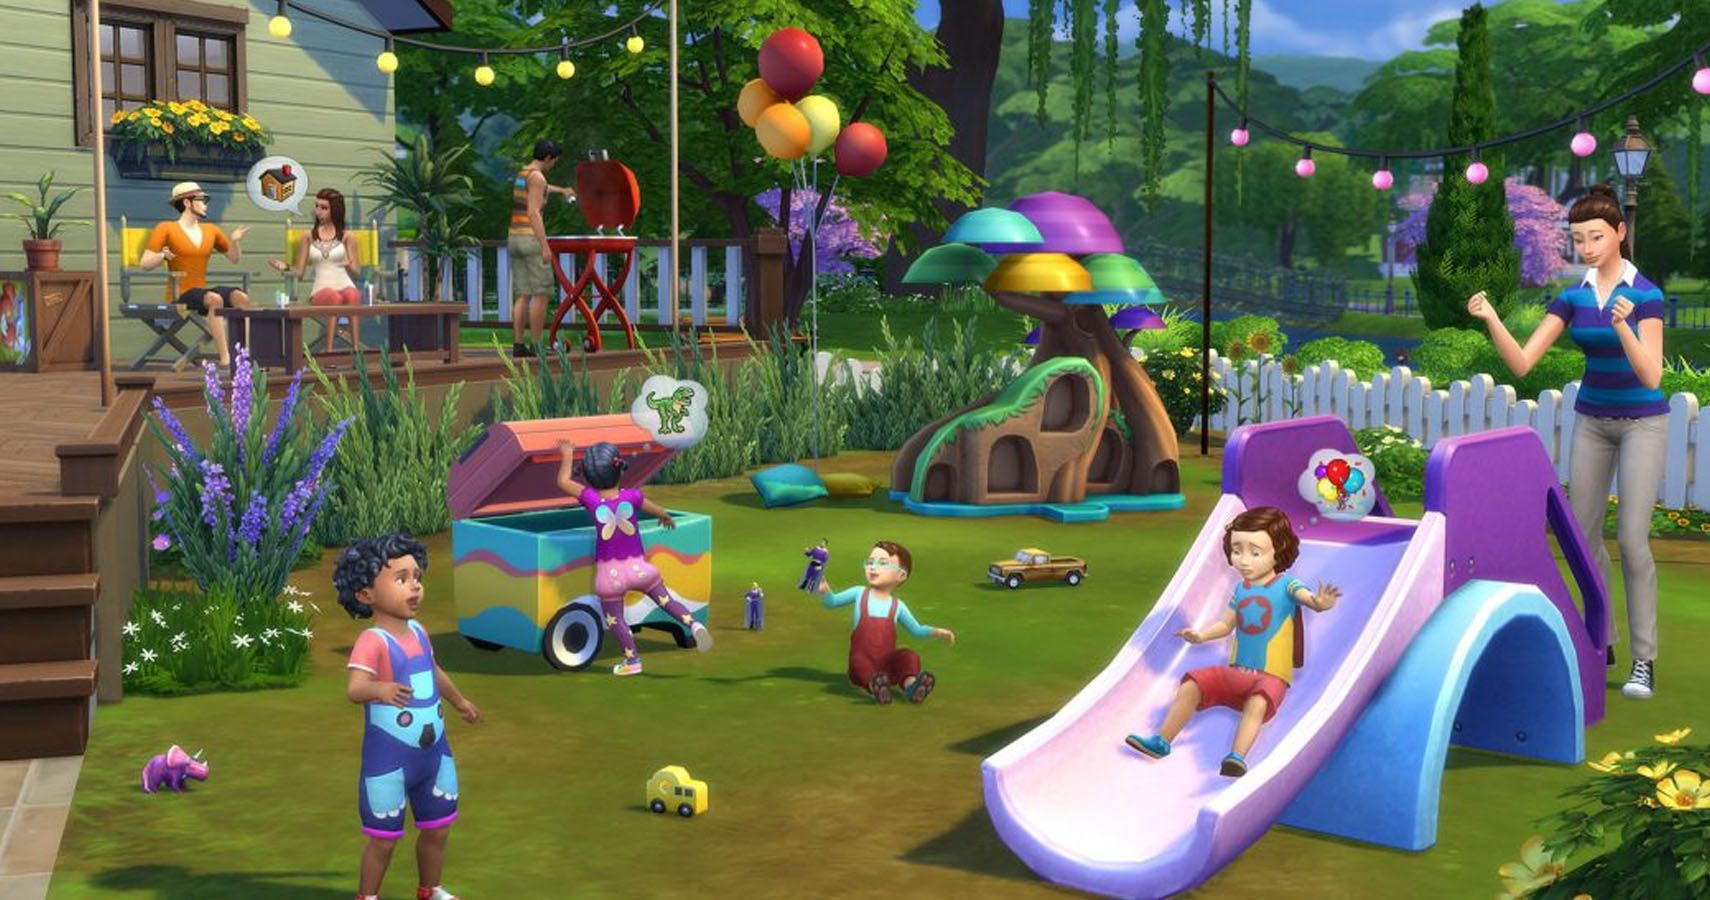 Sims backyard with toddlers on a playdate.